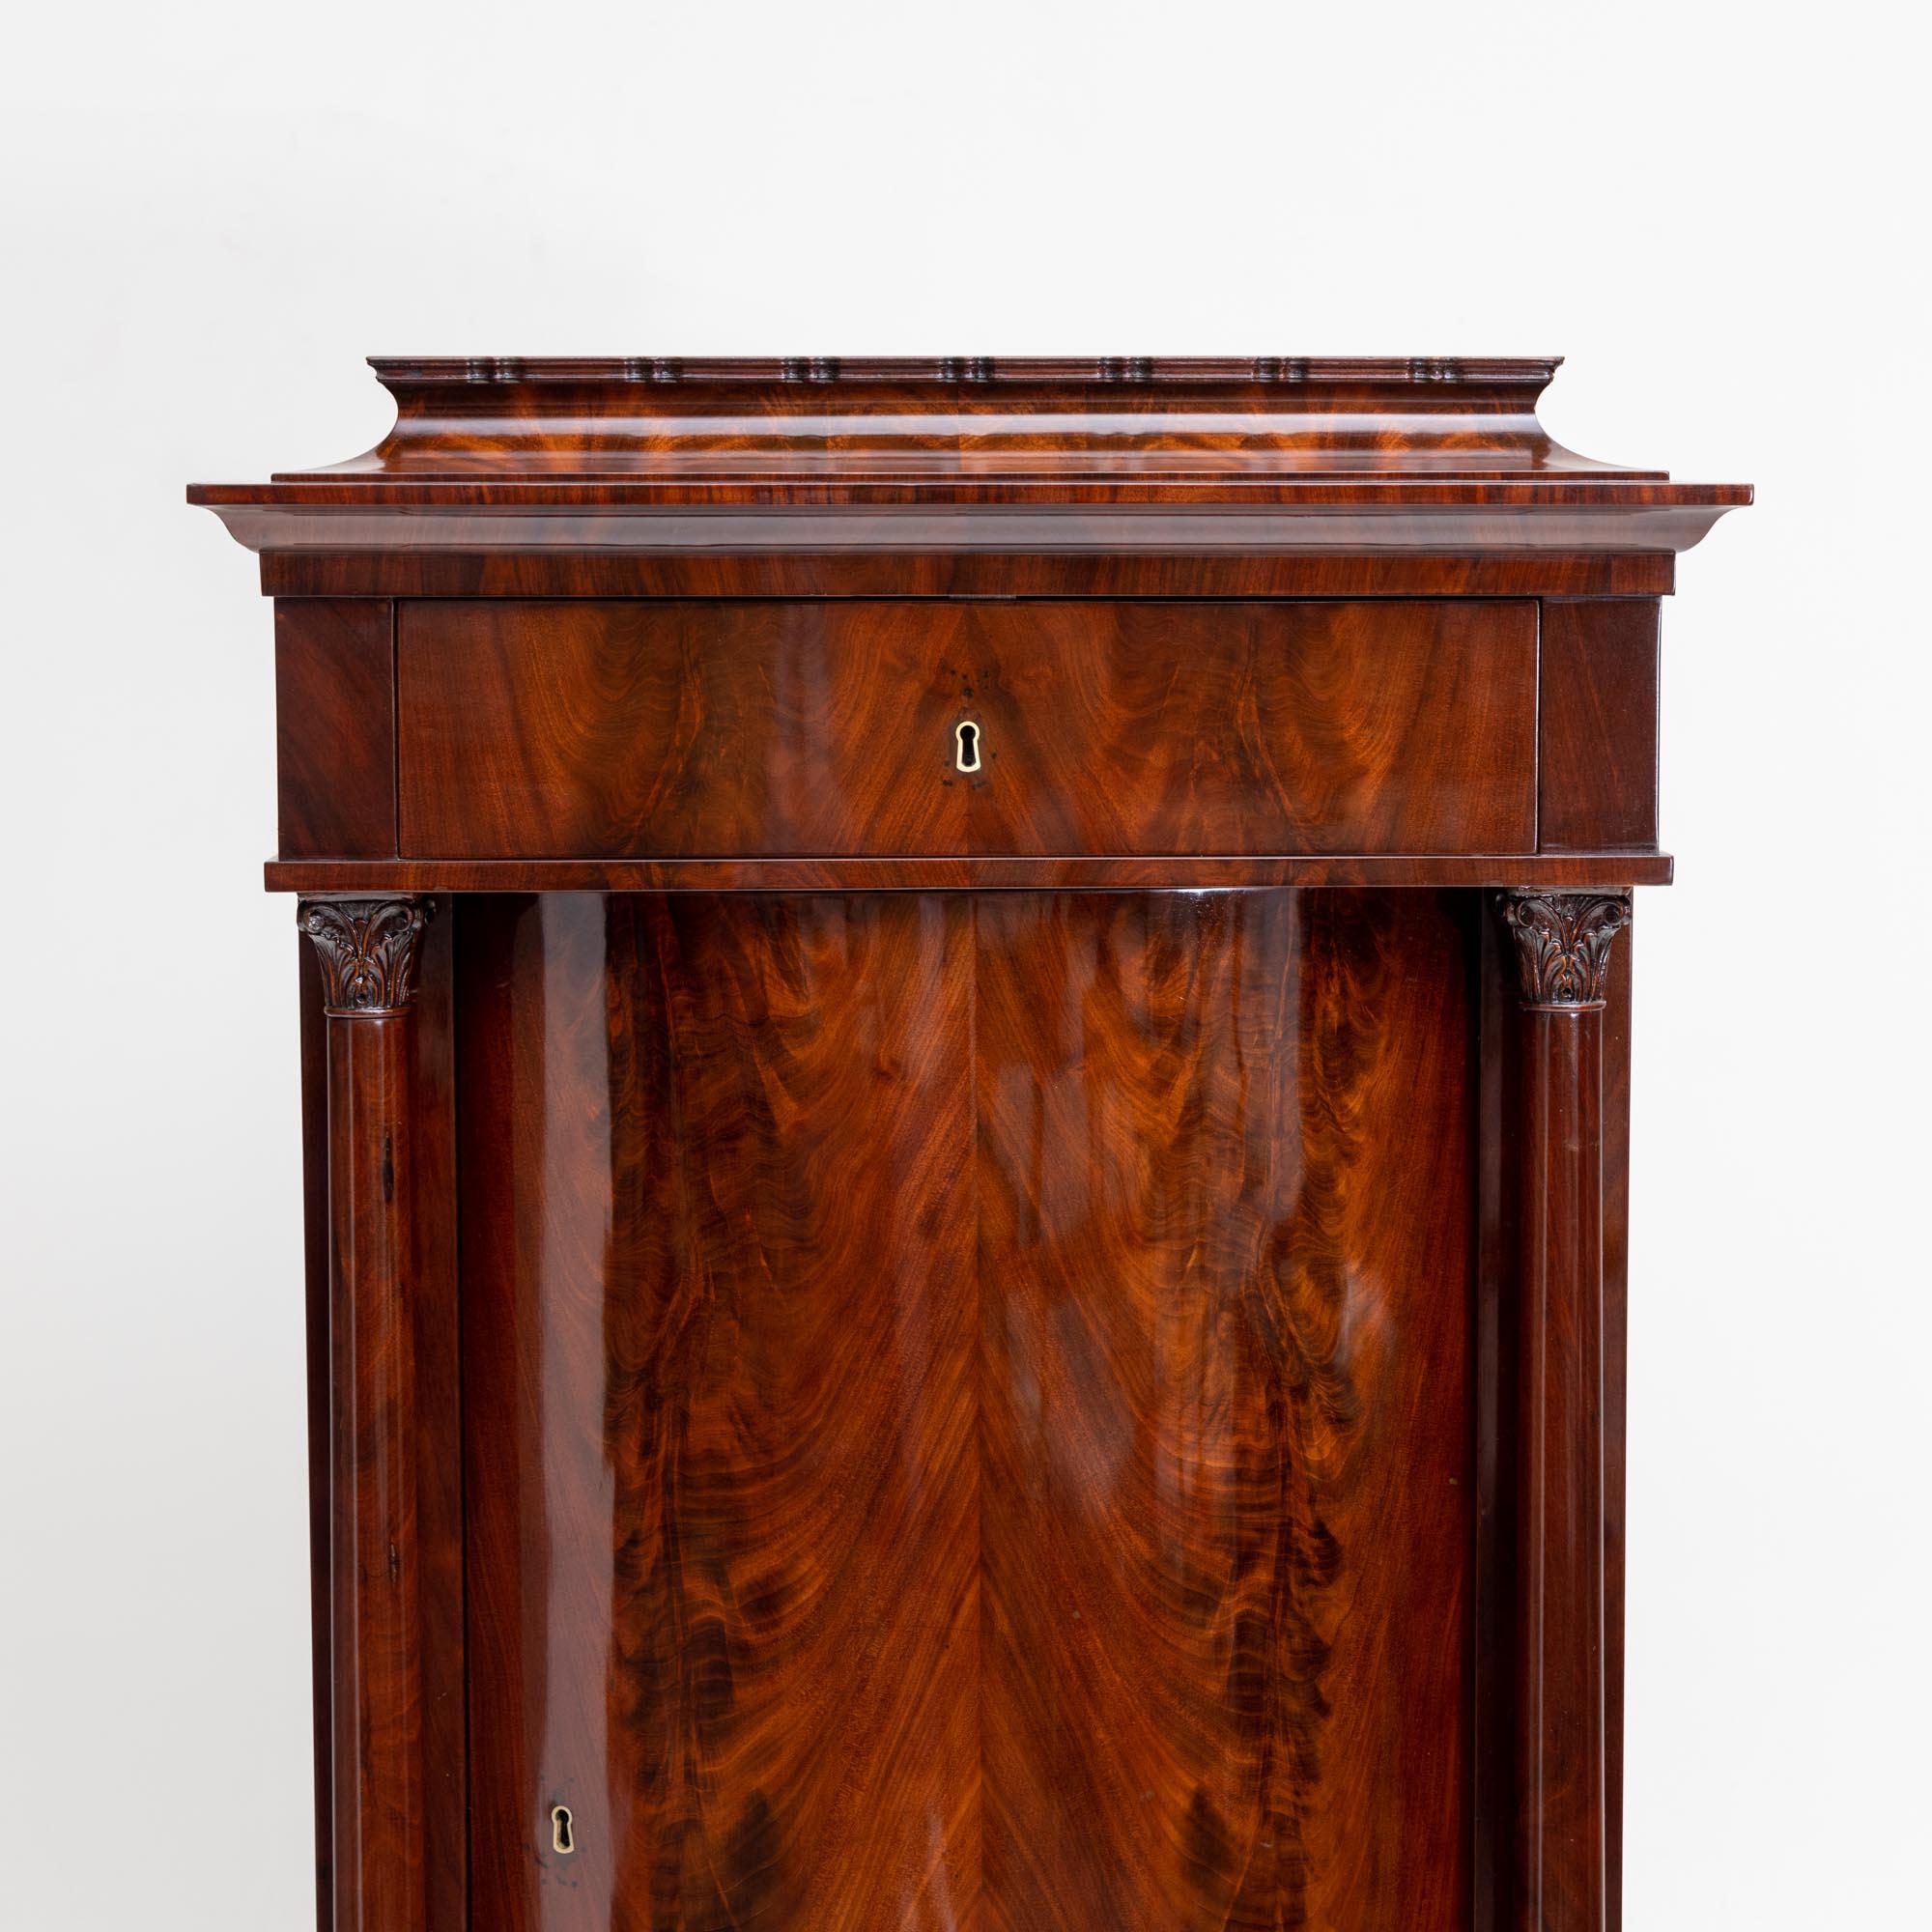 Mahogany veneered pillar cupboard with two drawers and a slightly convex door. The door is flanked by solid columns with leaf capitals. The cabinet stands on square feet and ends with a slightly raised central pedestal with a profiled edge. The